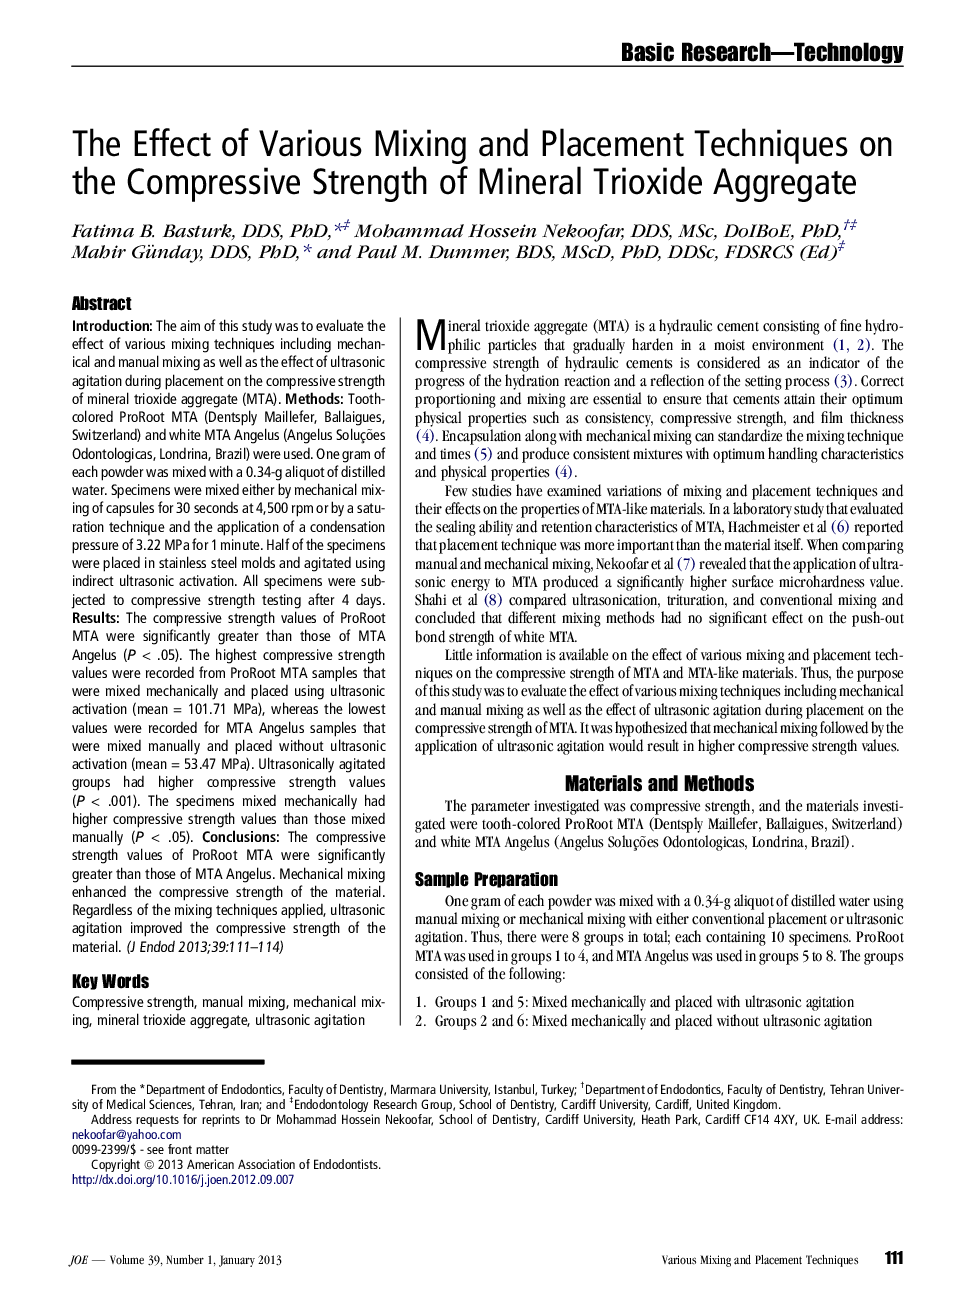 The Effect of Various Mixing and Placement Techniques on the Compressive Strength of Mineral Trioxide Aggregate